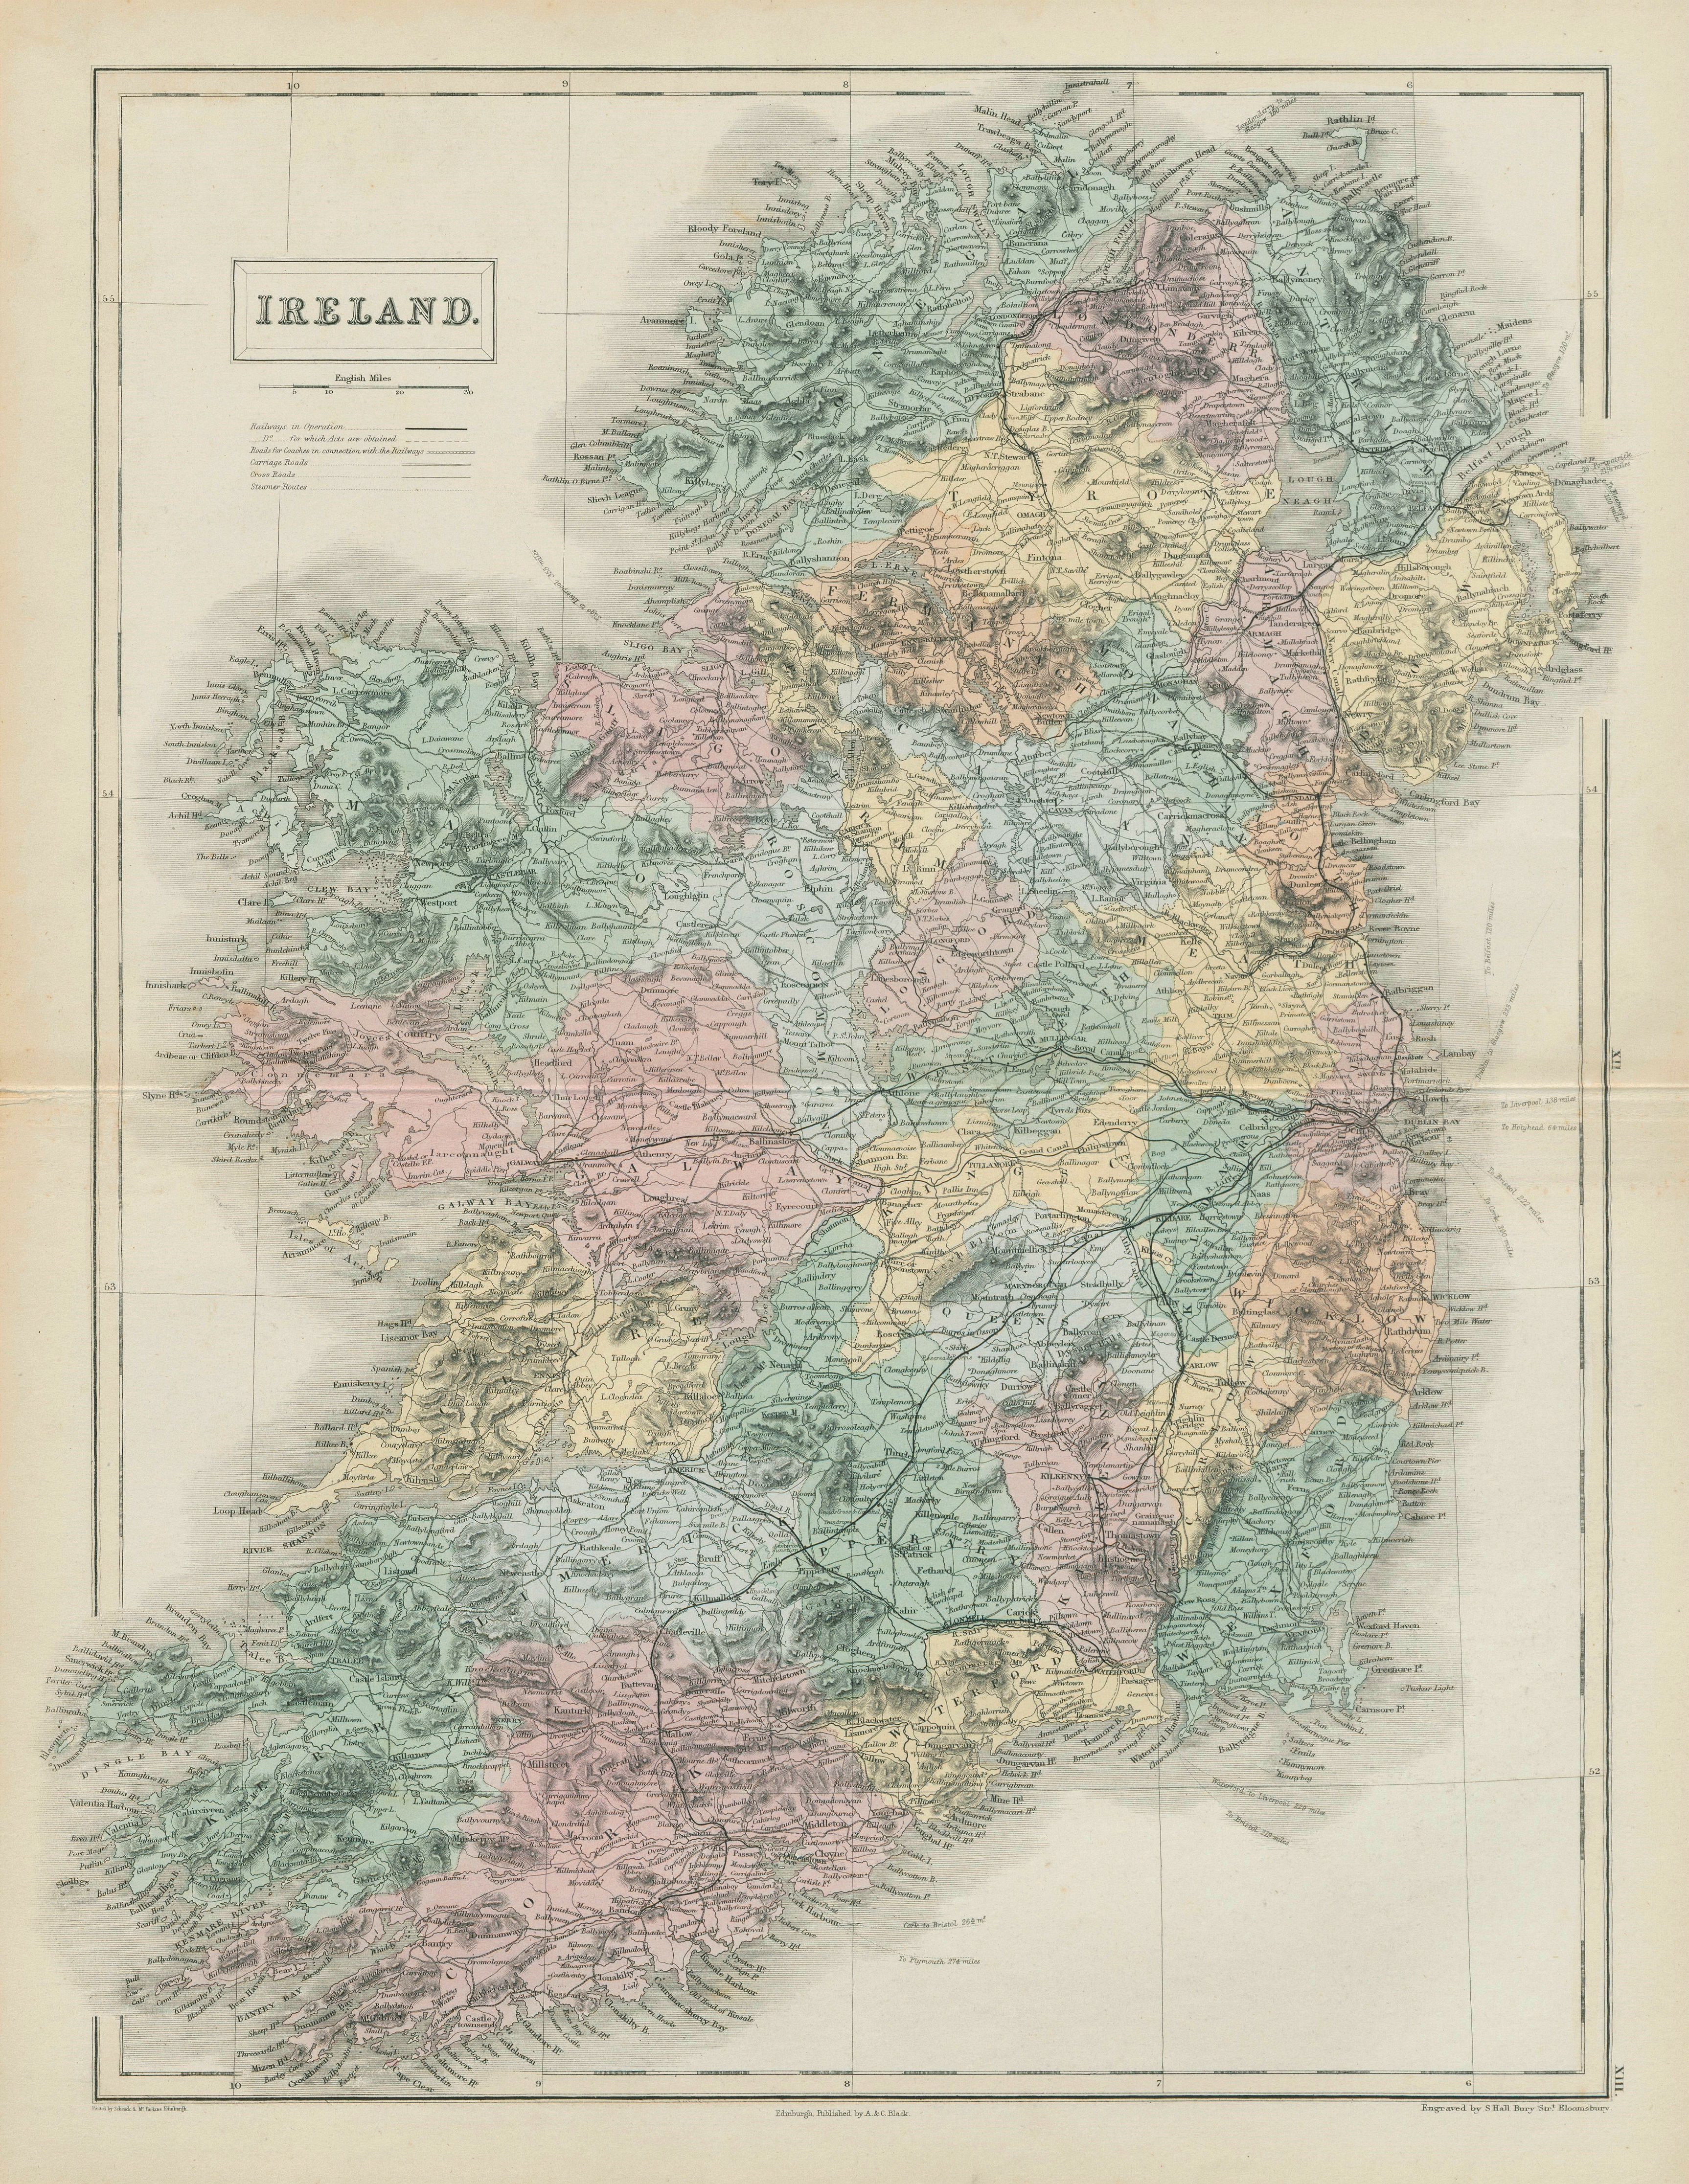 Associate Product Ireland showing counties & railways by SIDNEY HALL 1856 old antique map chart